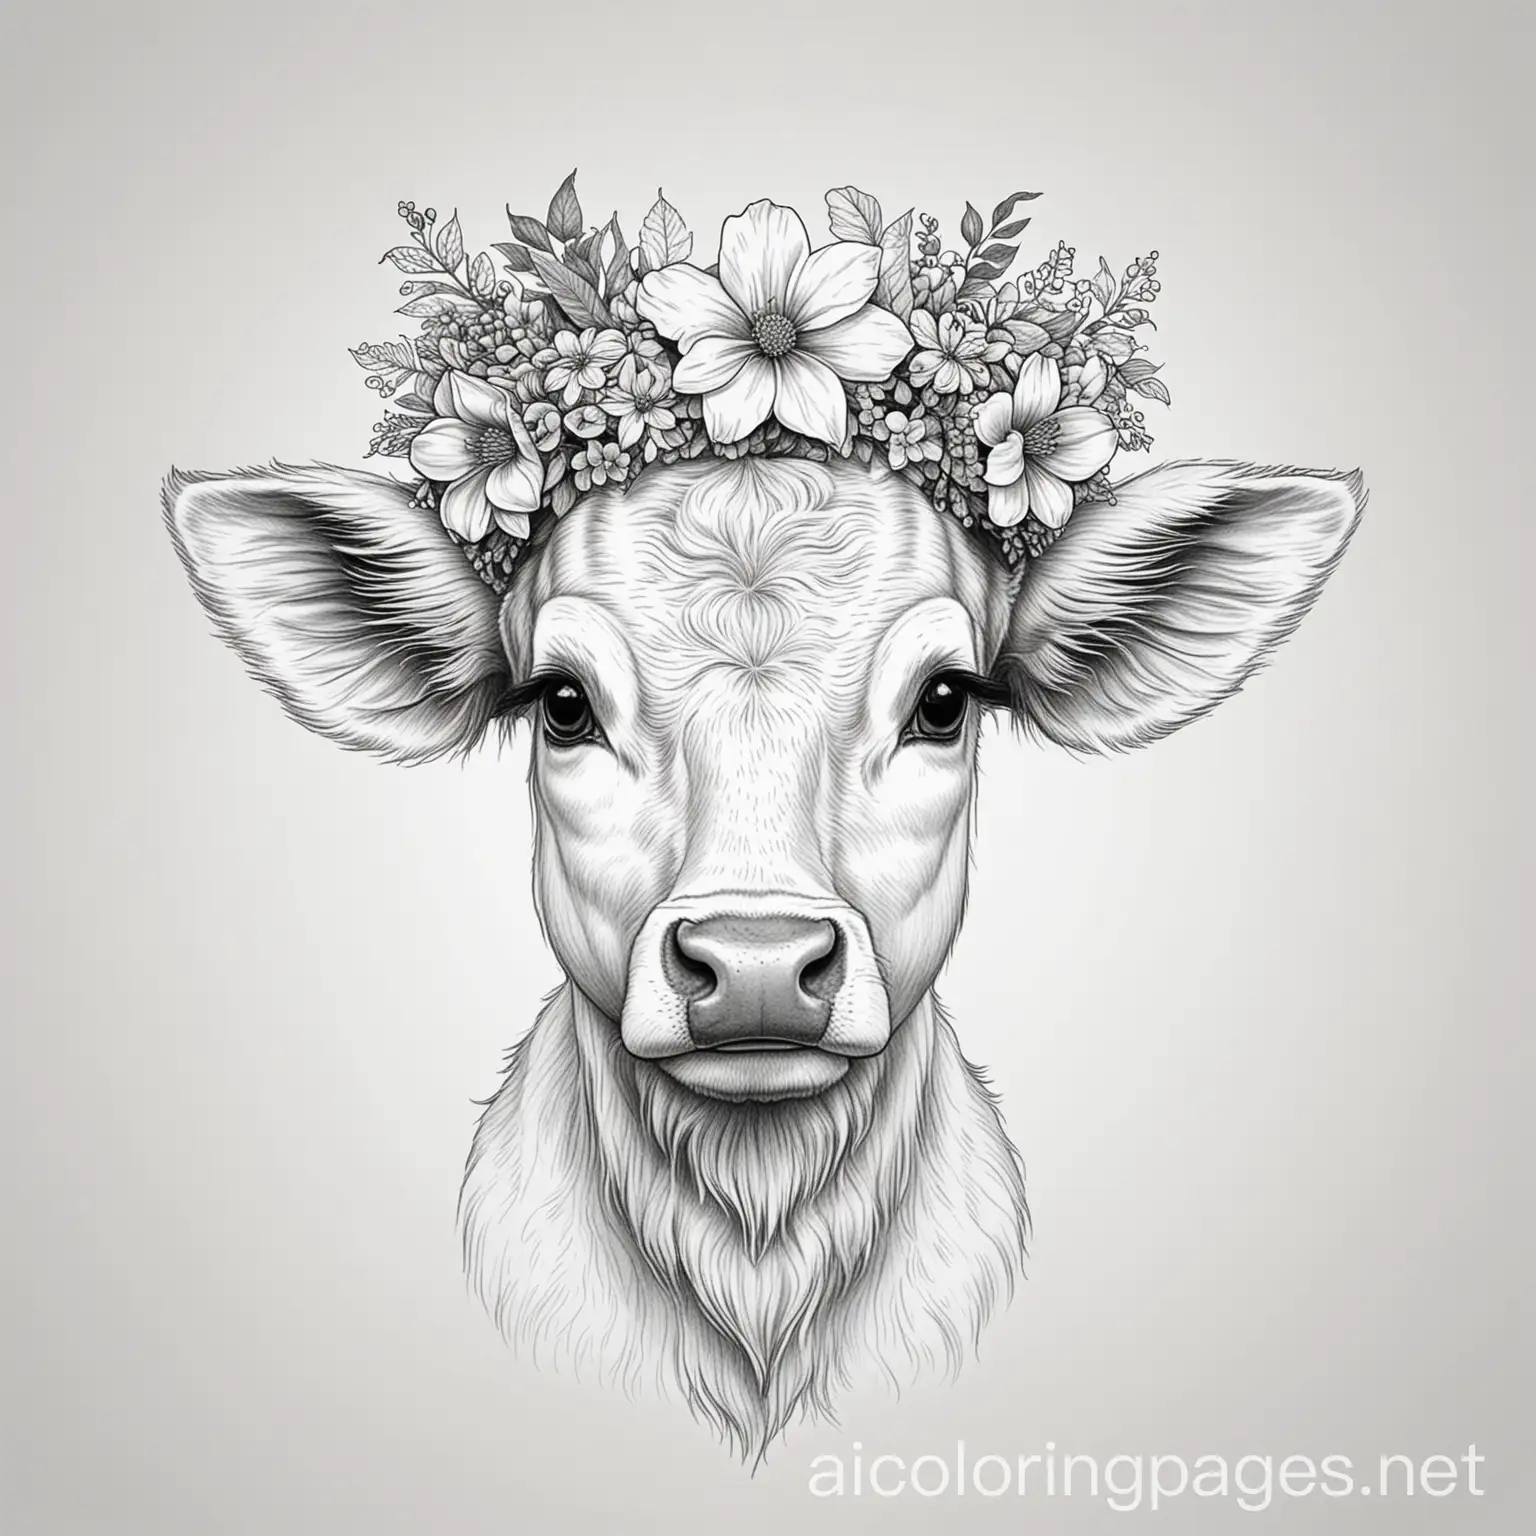 Calf-Wearing-Flower-Wreath-Crown-Coloring-Page